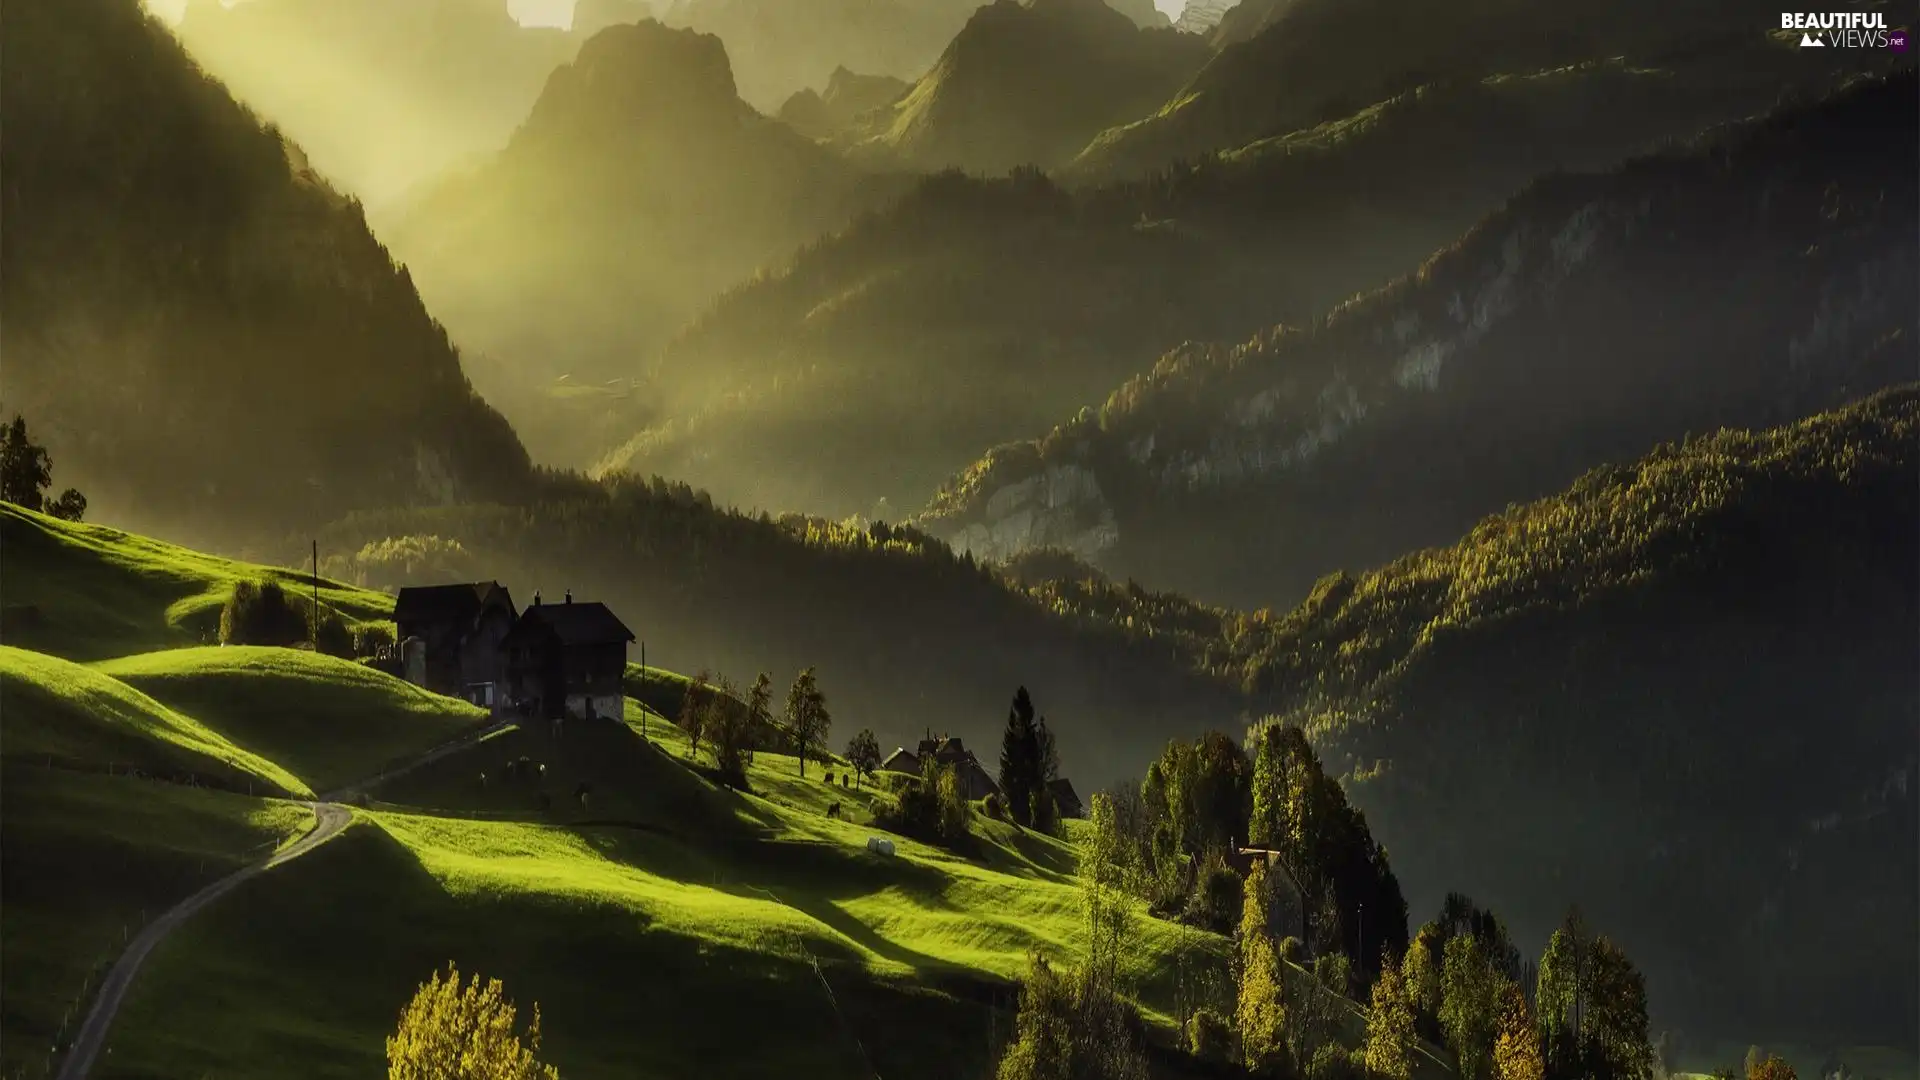 Meadow, Mountains, viewes, Way, trees, farm